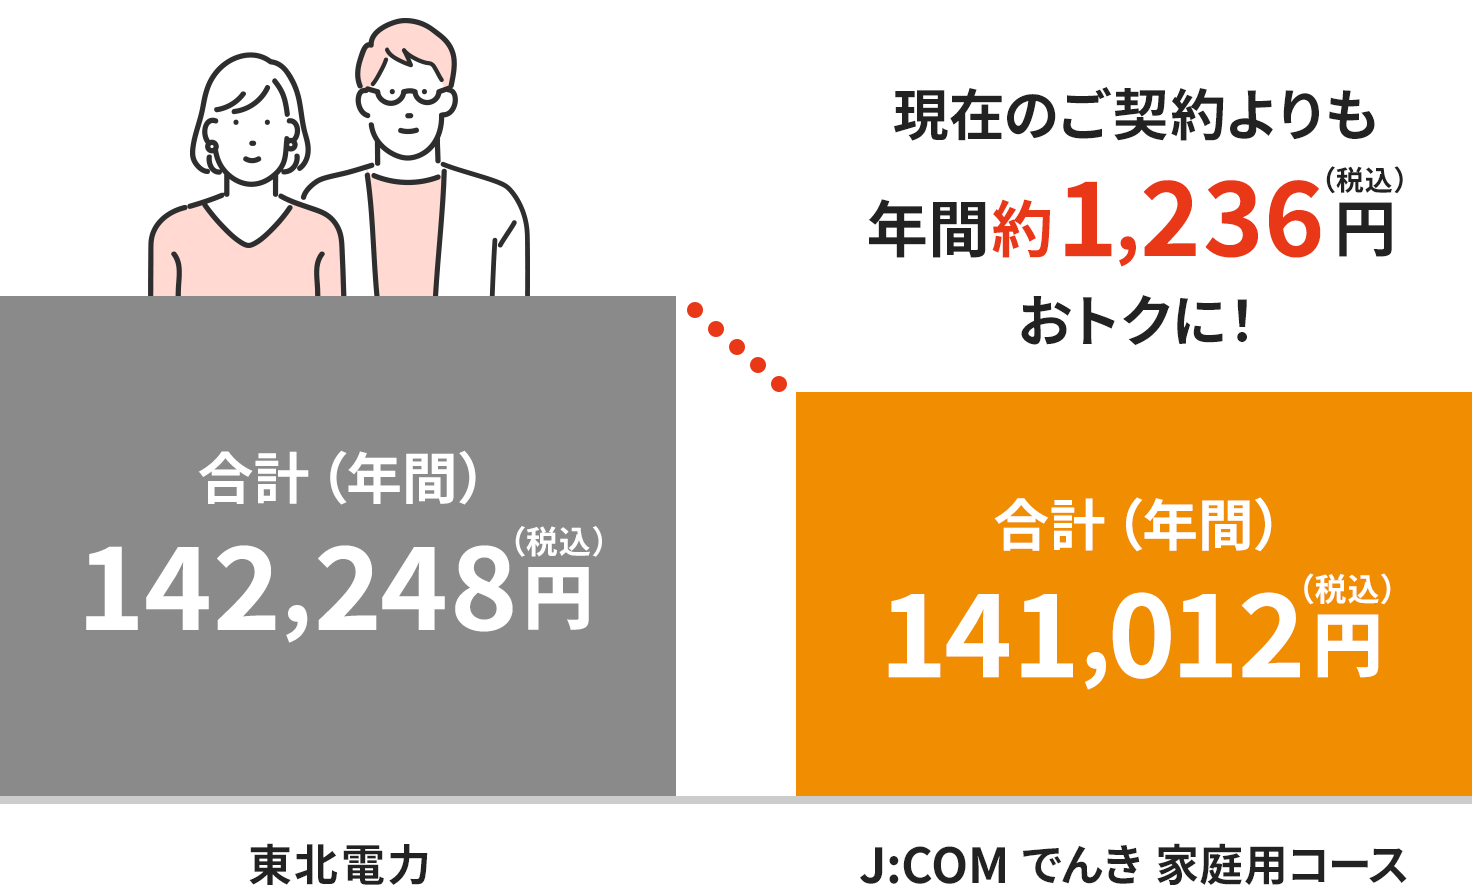 Image of charges in the Tohoku Electric Power area (for a two-person household)